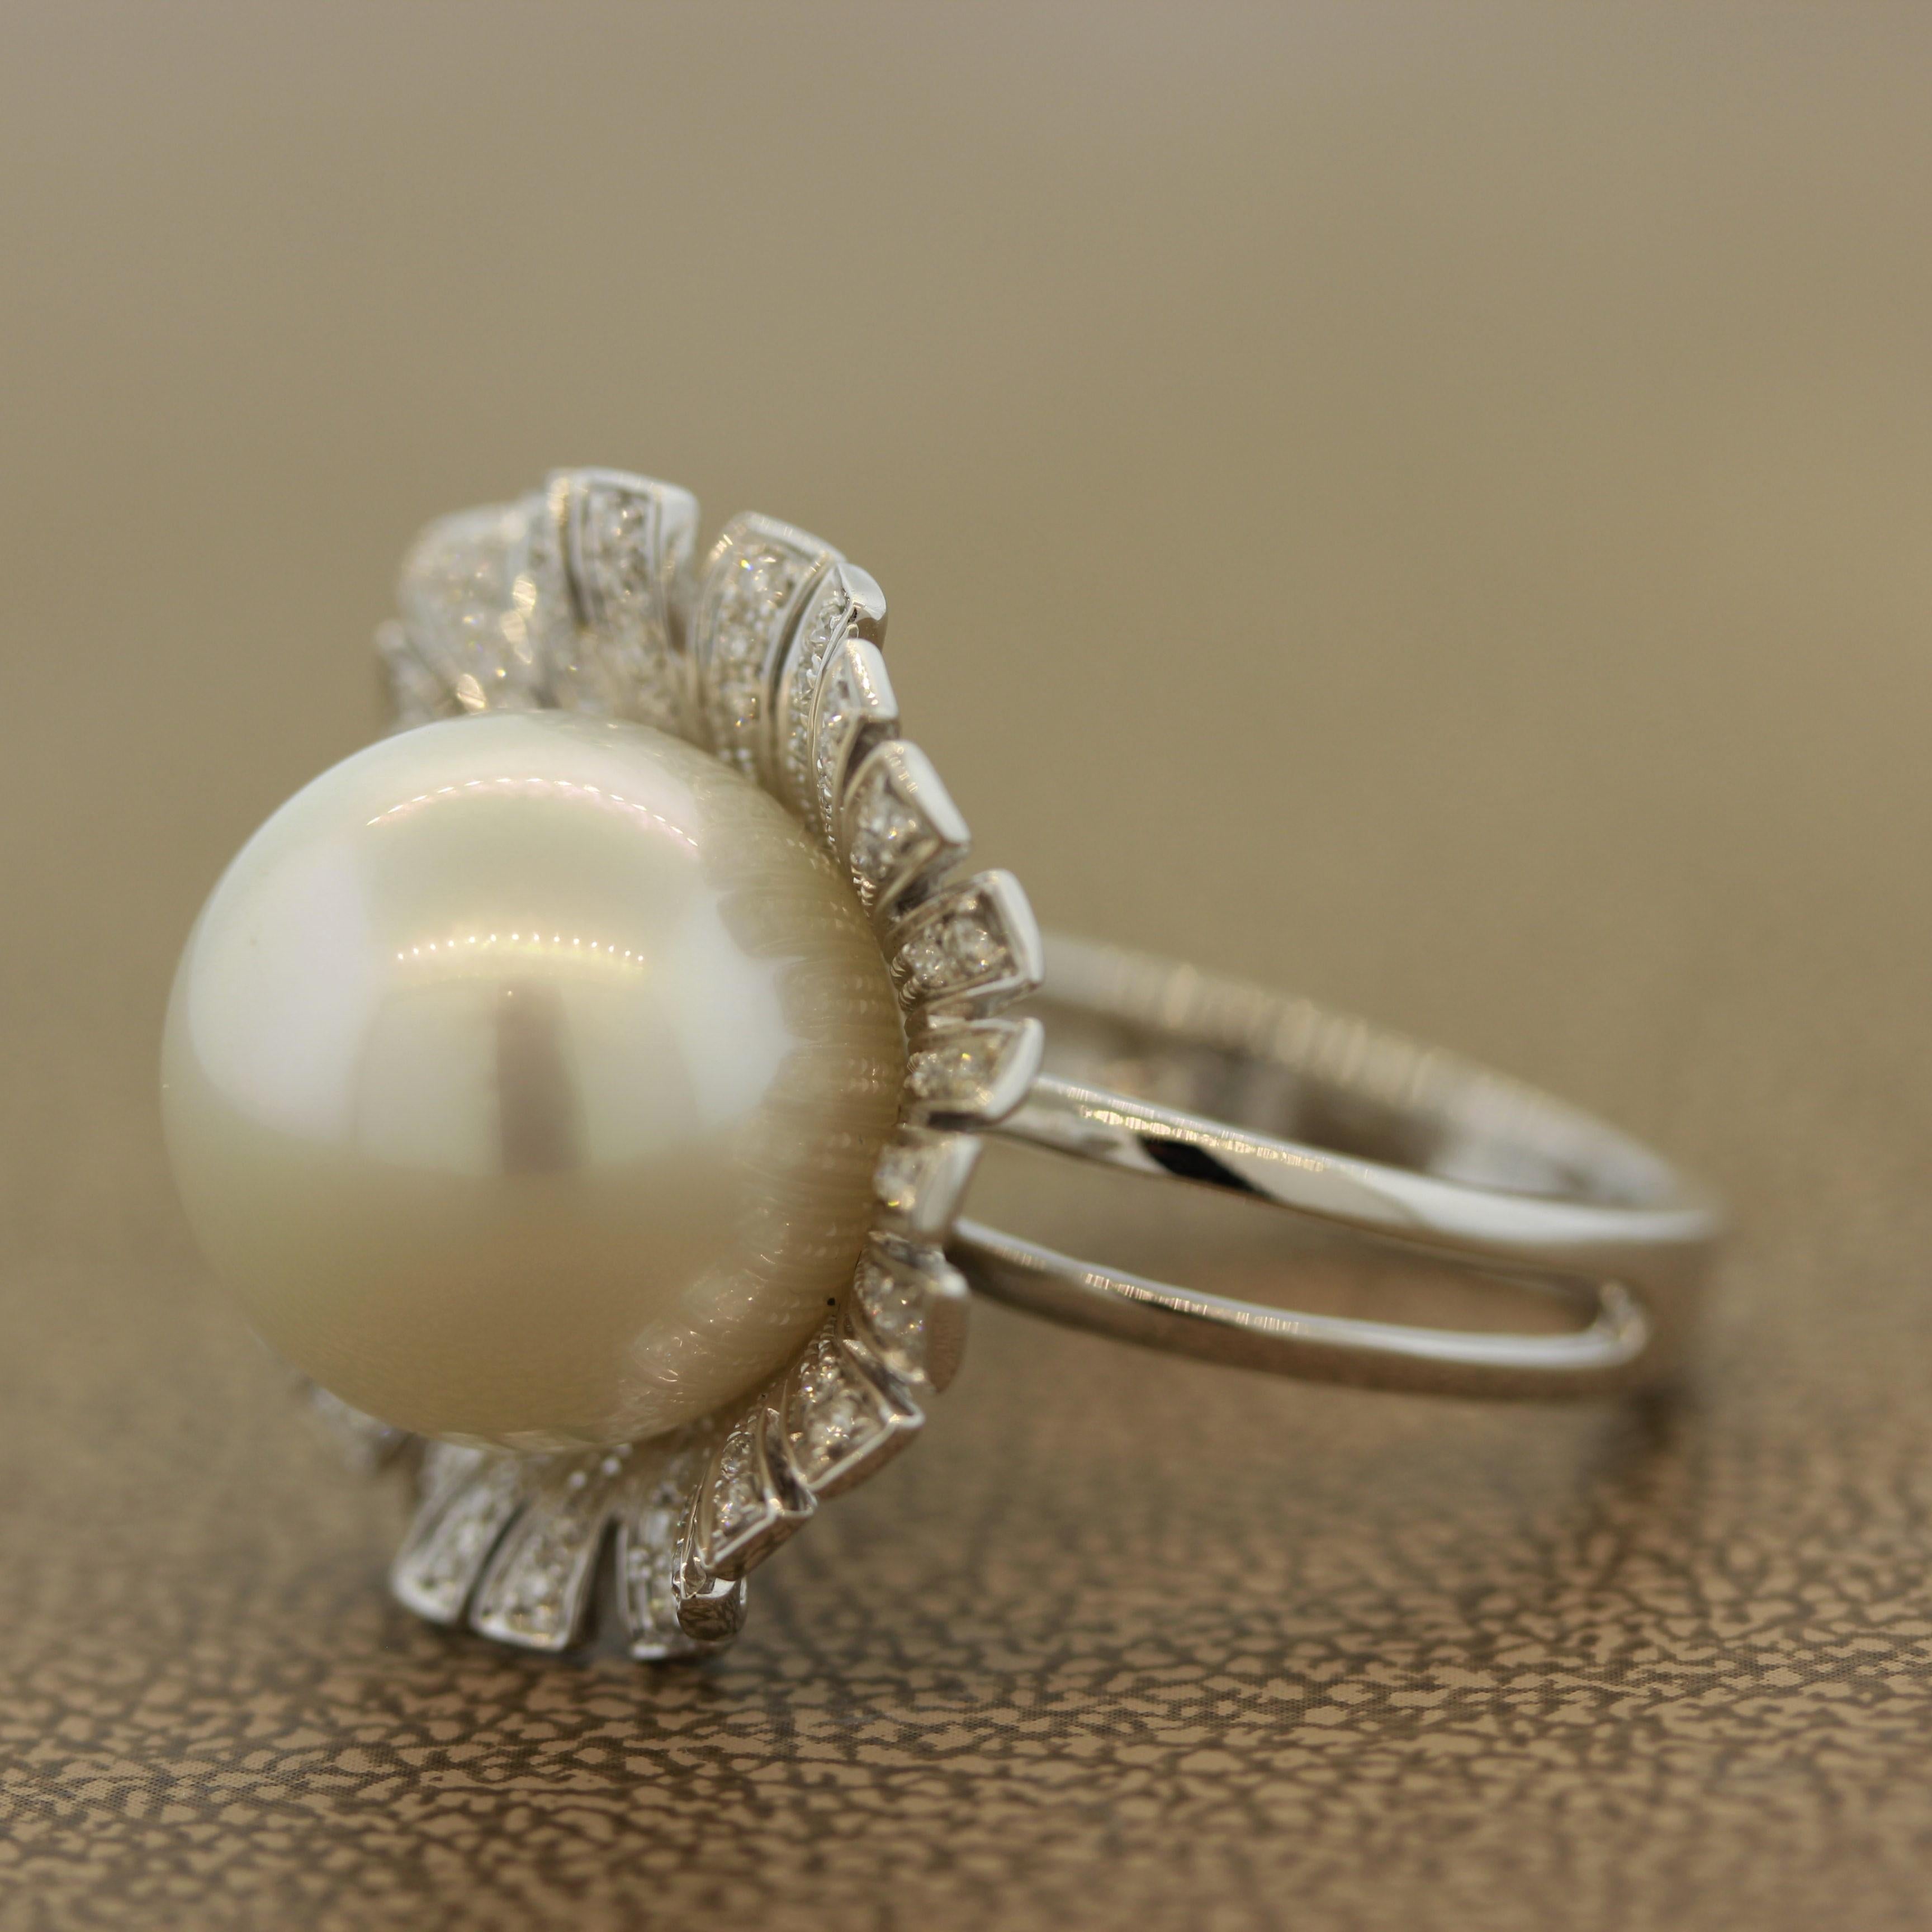 A lustrous and natural cultured South Sea pearl takes center stage as a blossoming flower-bud in this unique ring. It measures approximately 14mm in diameter and is perfectly smooth without any blemishes or bruises. It has a soft rose overtone